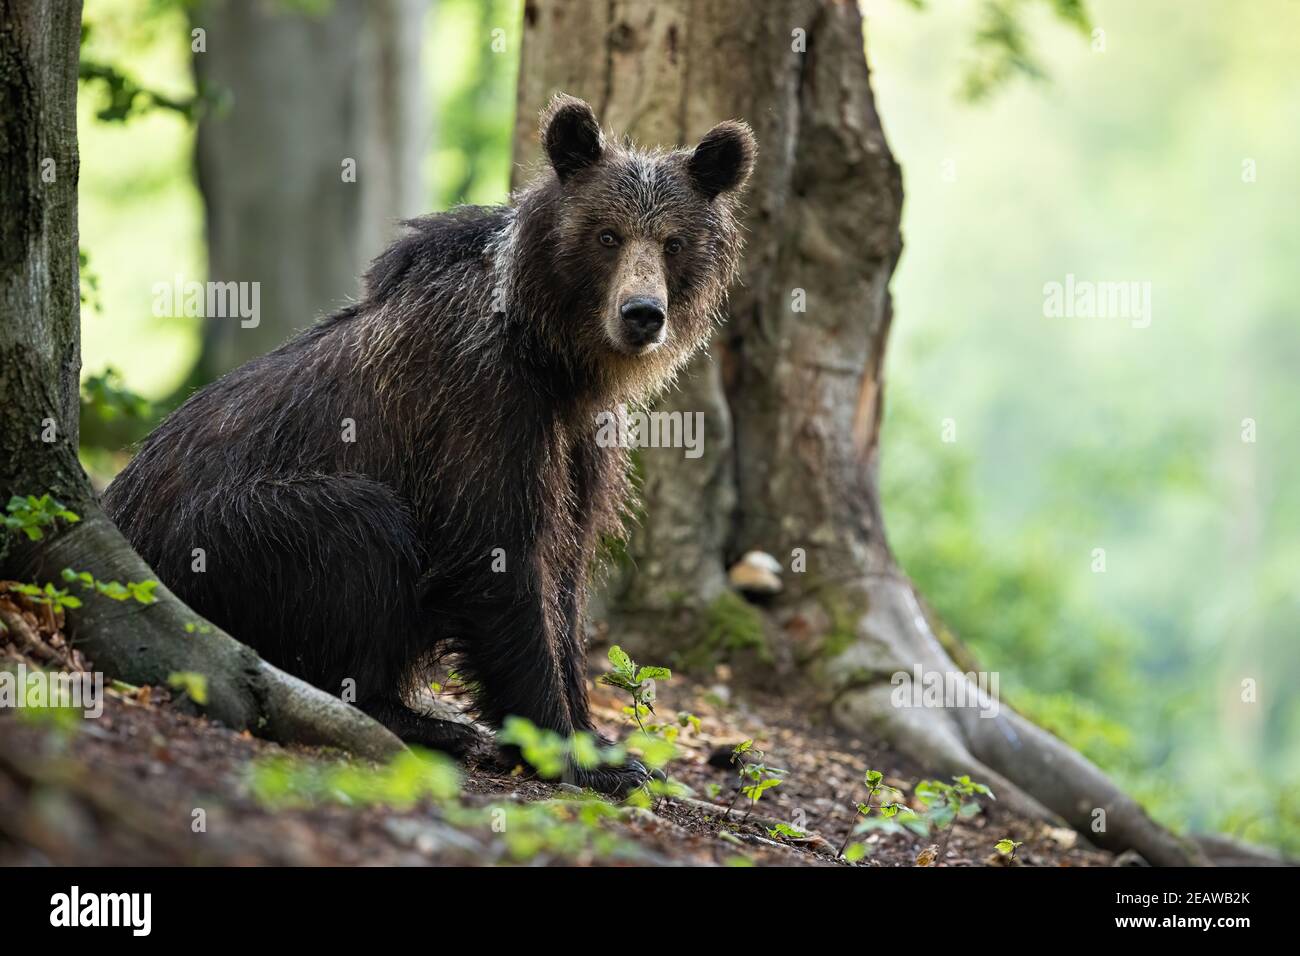 Young brown bear sitting by a tree in summer forest. Stock Photo